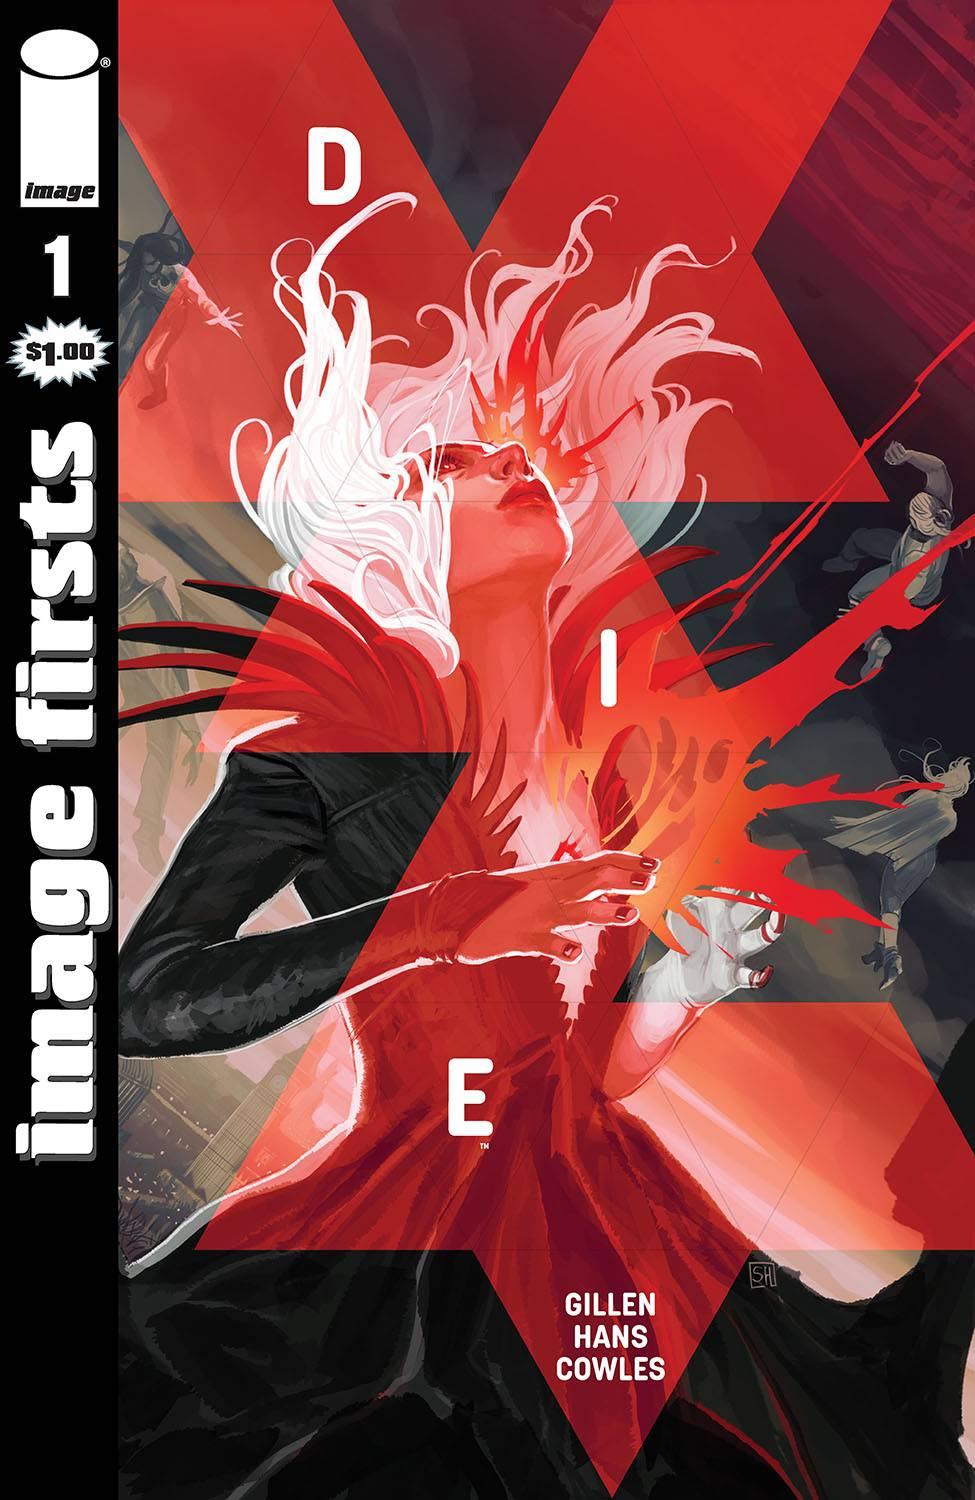 IMAGE FIRSTS DIE #1 (MR) (SHIPS 02-03-21) - PCKComics.com